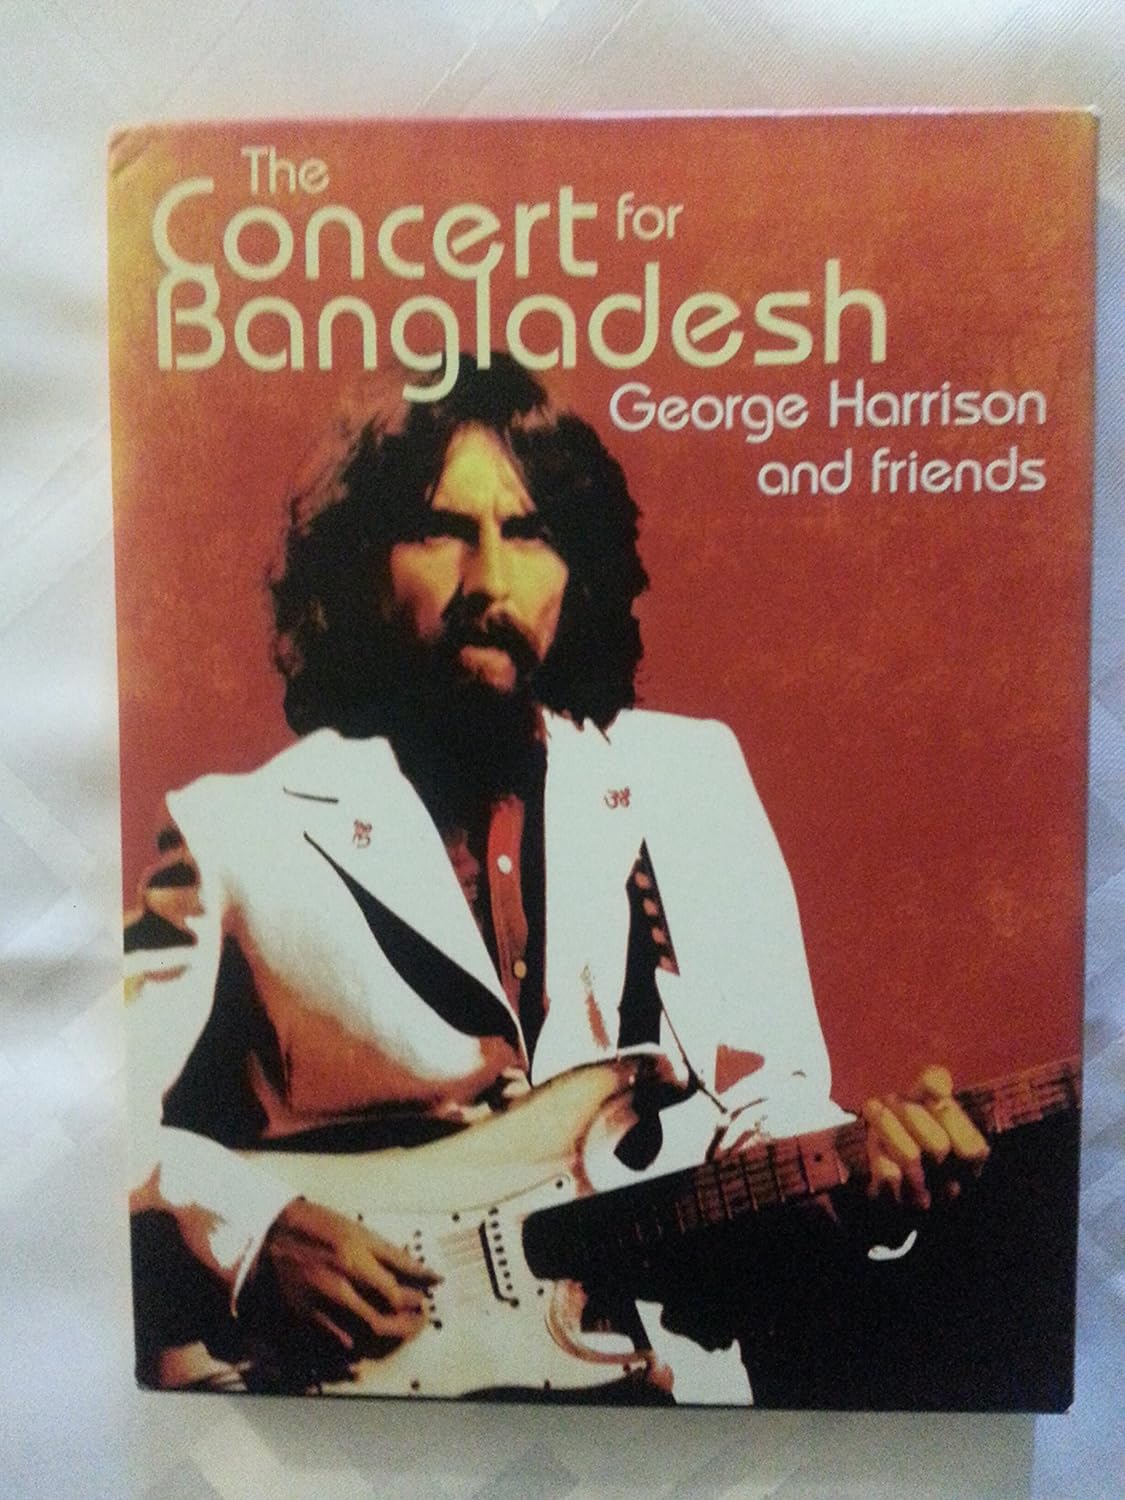 Concert for Bangladesh in 1971